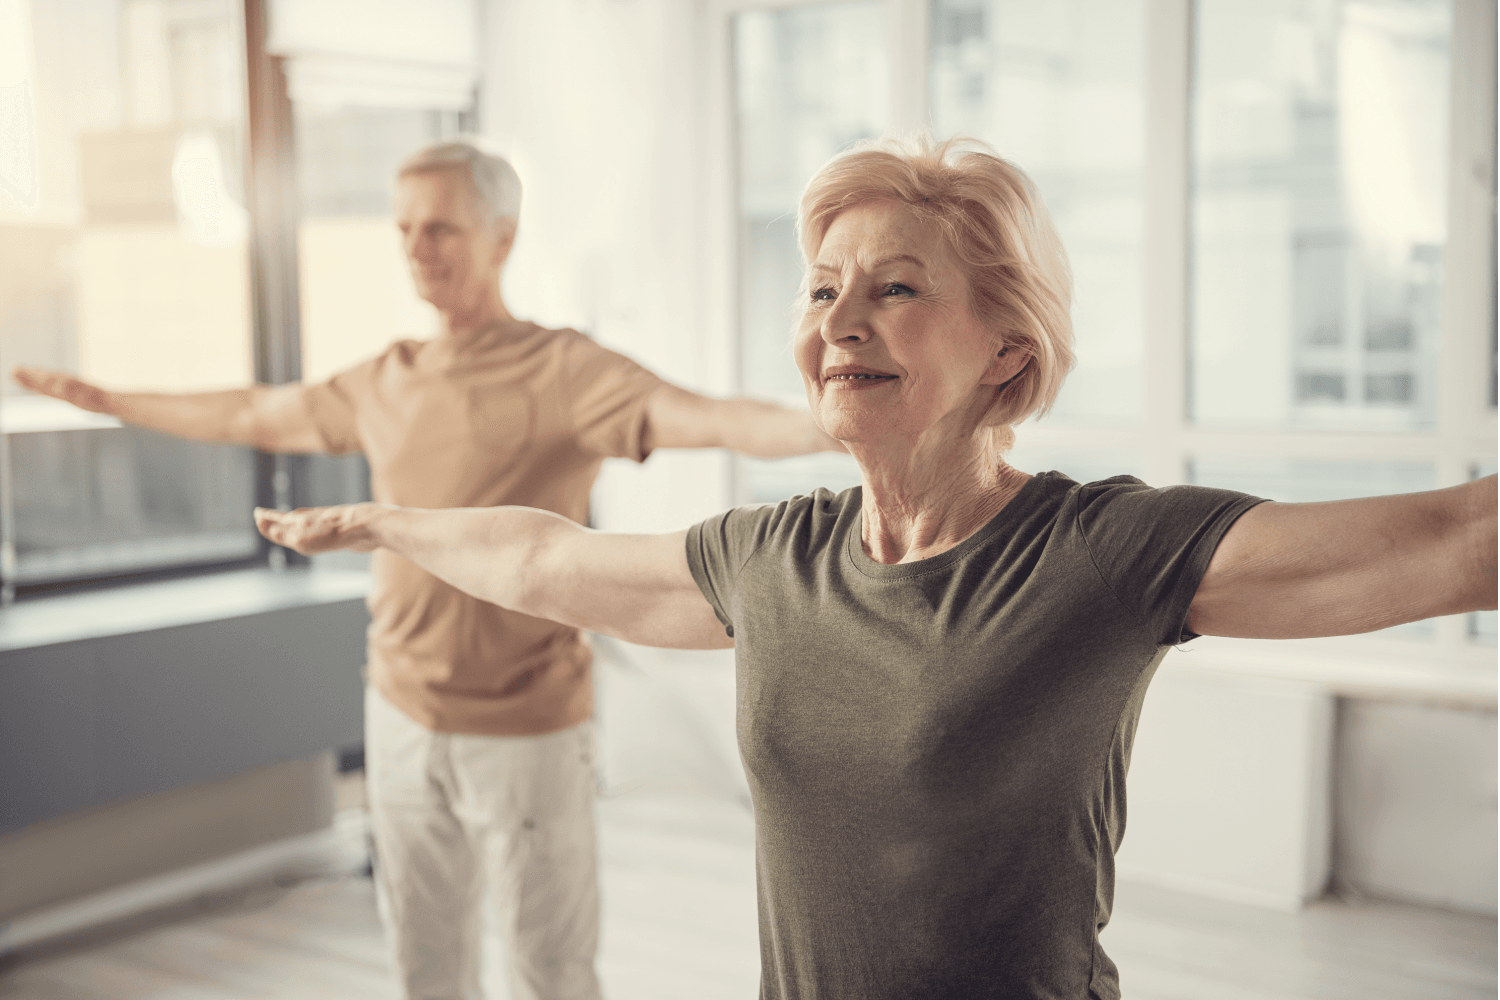 Two people having an aerobic workout